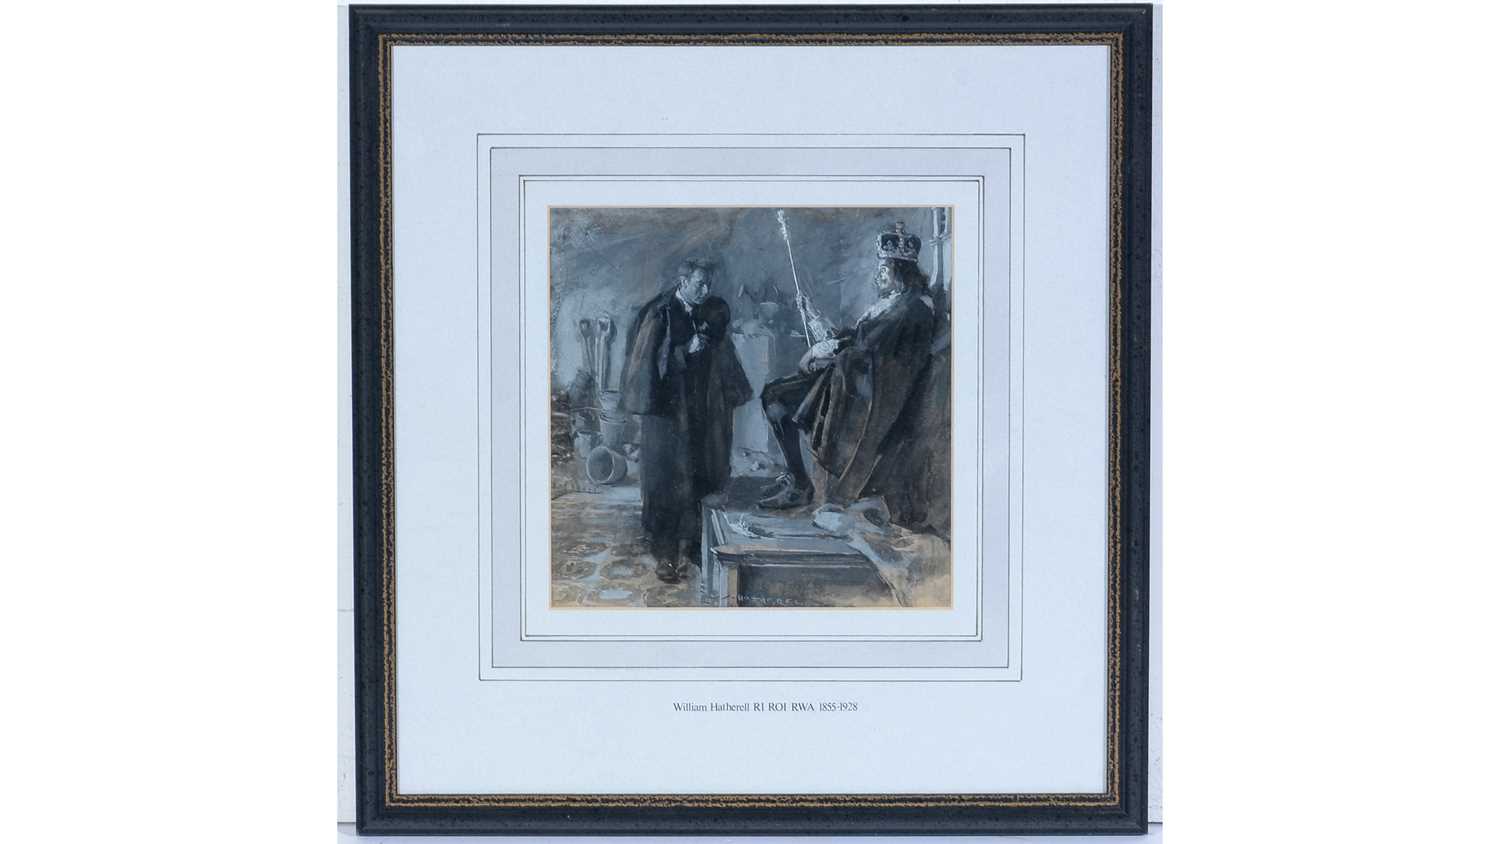 Lot 725 - William Hatherell RI ROI RWA - Charles I Receiving Word of His Fate | watercolour